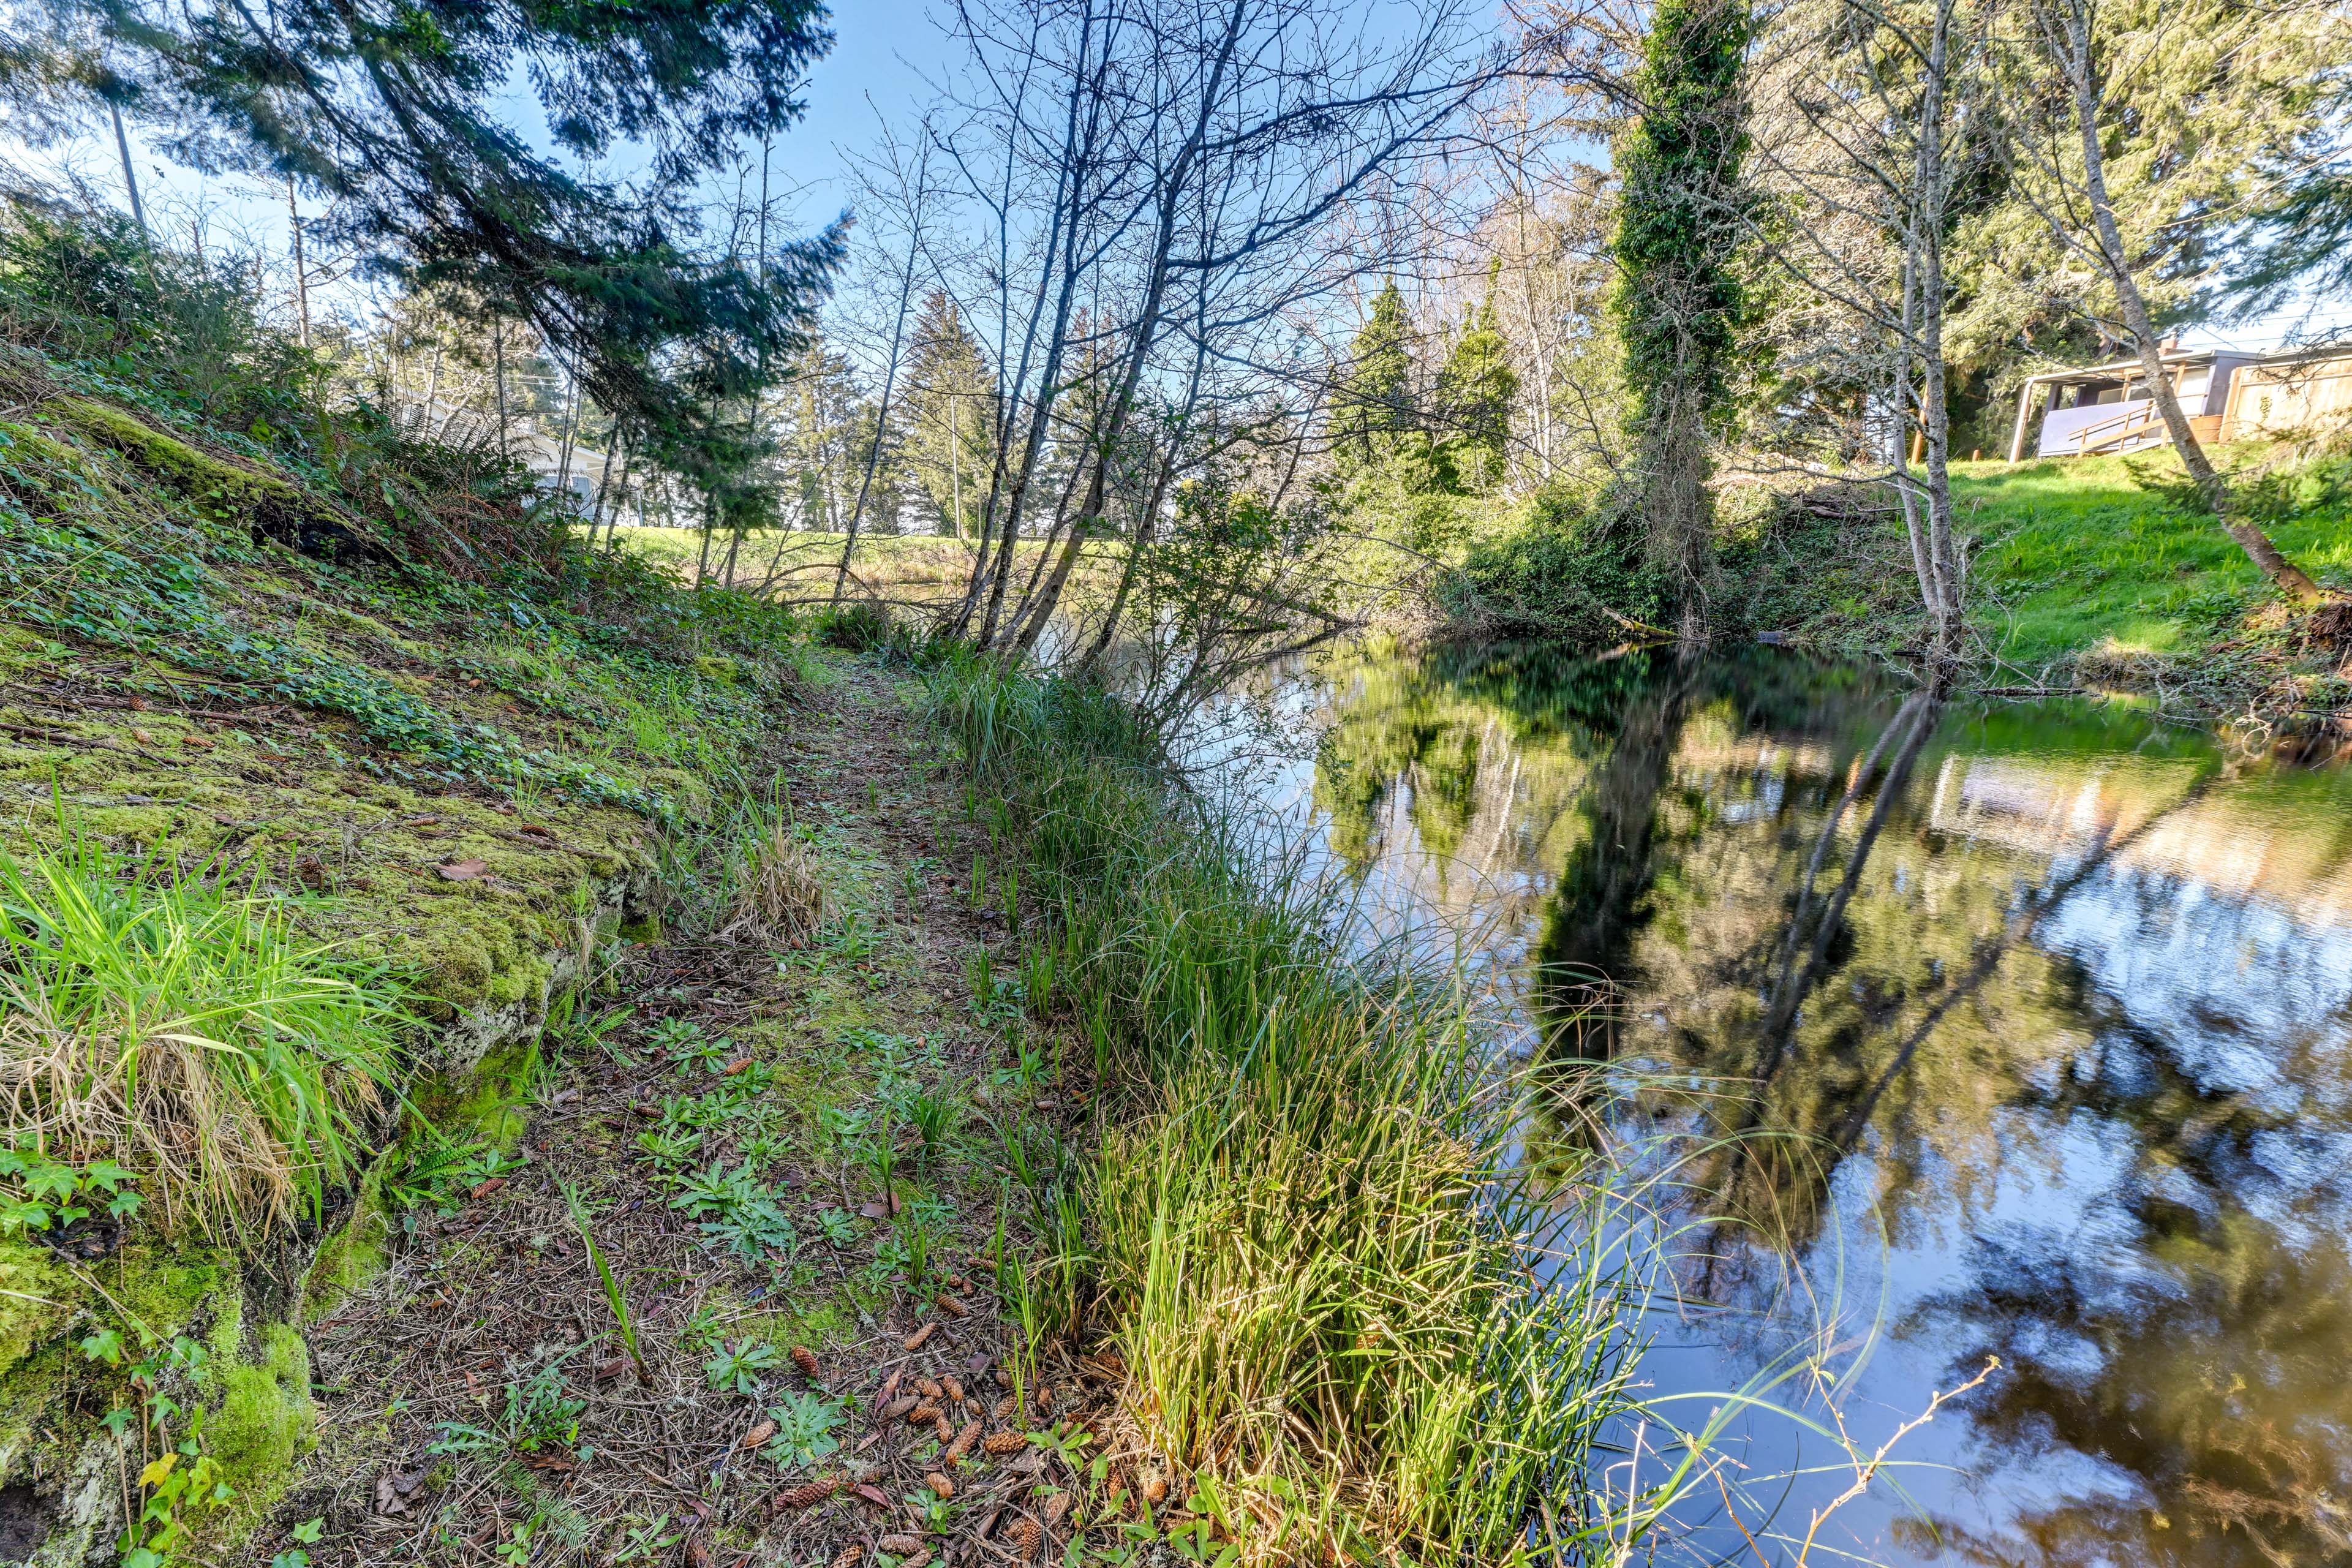 On-Site Creek & Pond | Walking Trail | Fishing Permitted